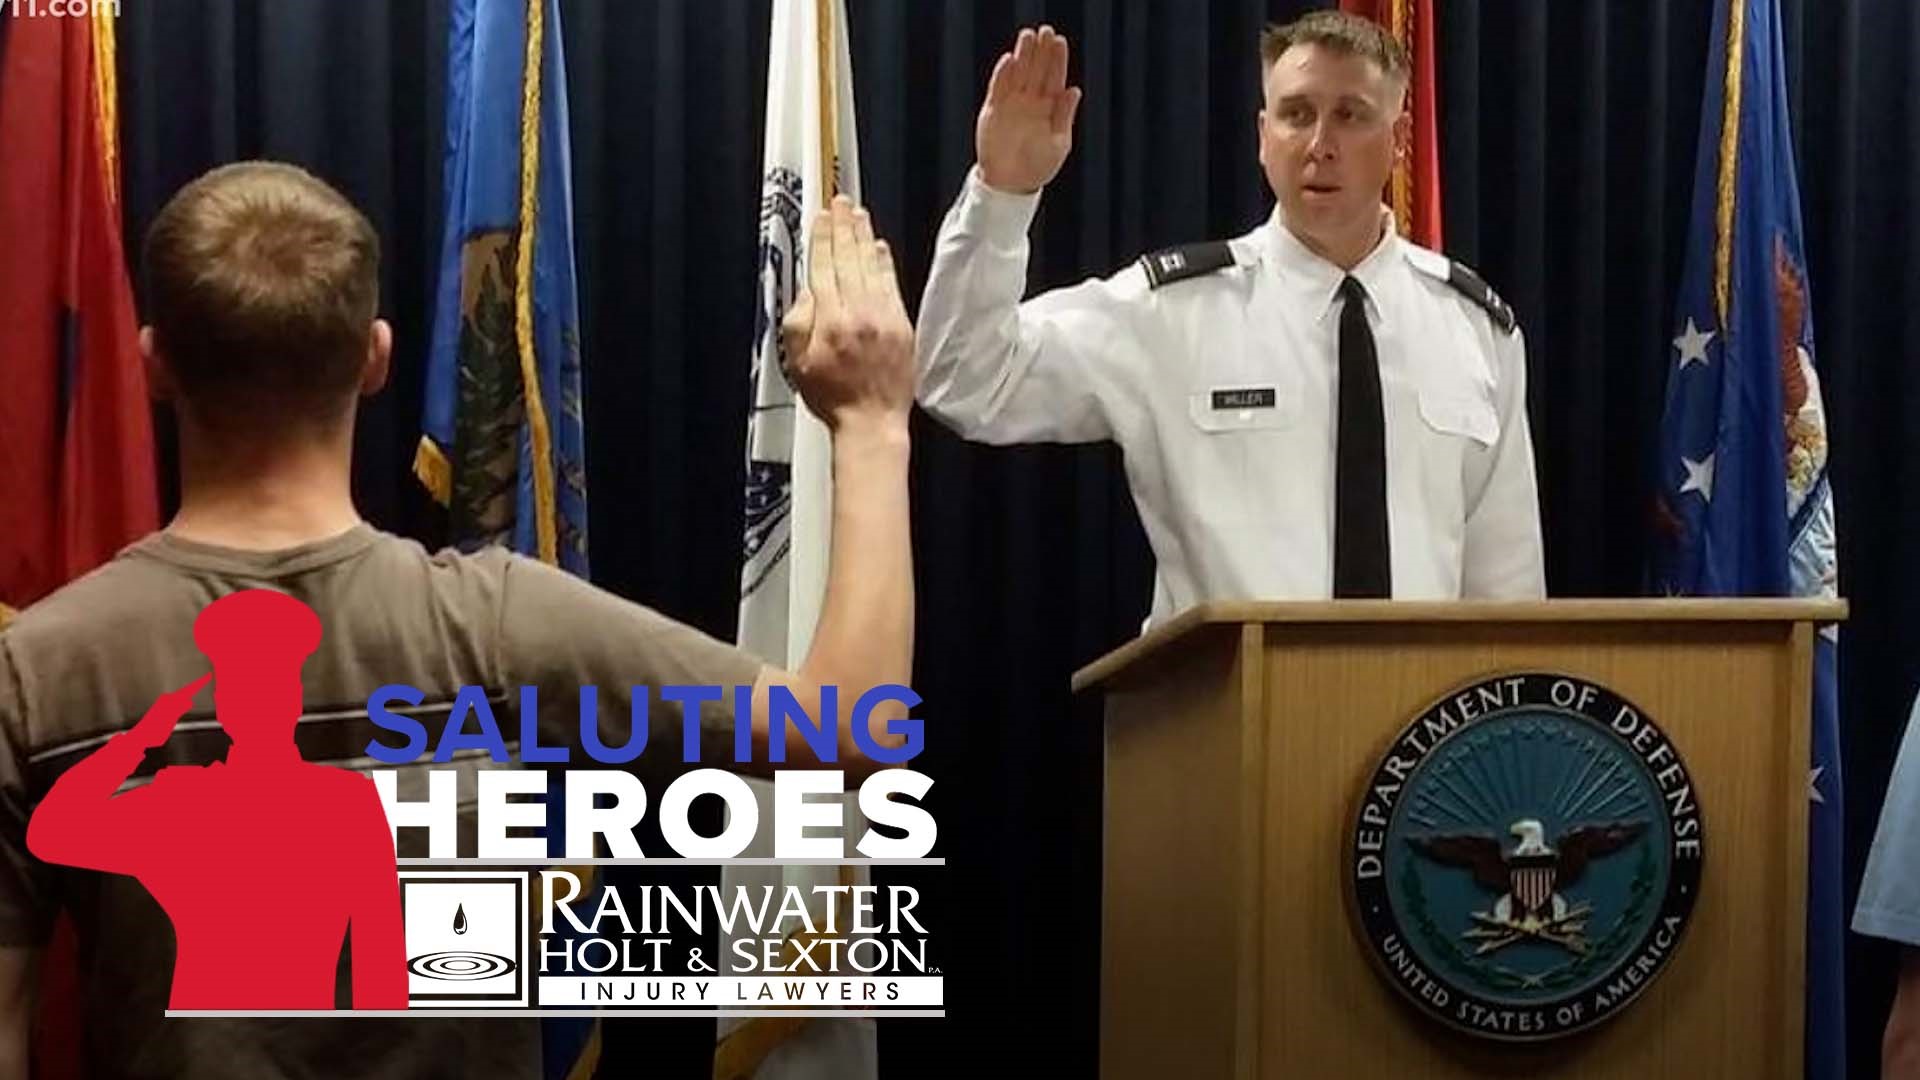 In this episode of Saluting Heroes, we take a look at the various ways that Arkansas is supporting and honoring the heroes that call the Natural State home.